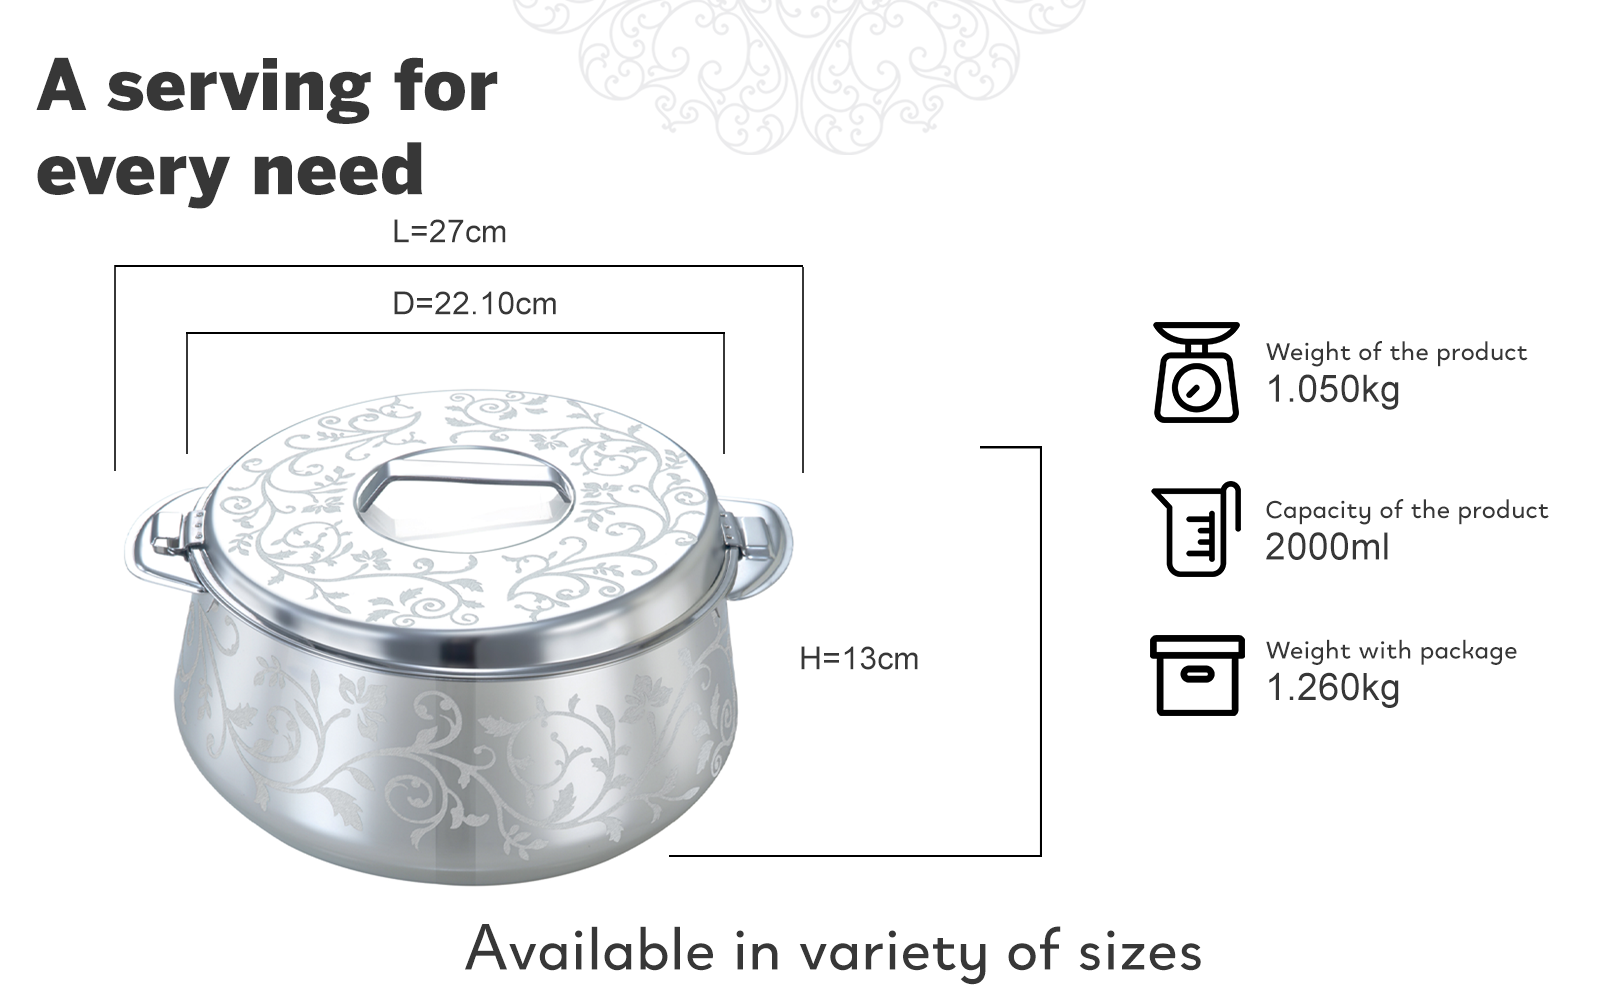 PRADEEP Esteem Stainless Steel Insulated Serving Casserole with Design Lid/Double Walled/Stainless Steel Casserole/Hot & Cold/Dishwasher Safe/Serving Casserole/BPA Free/Silver/7231-SILVER